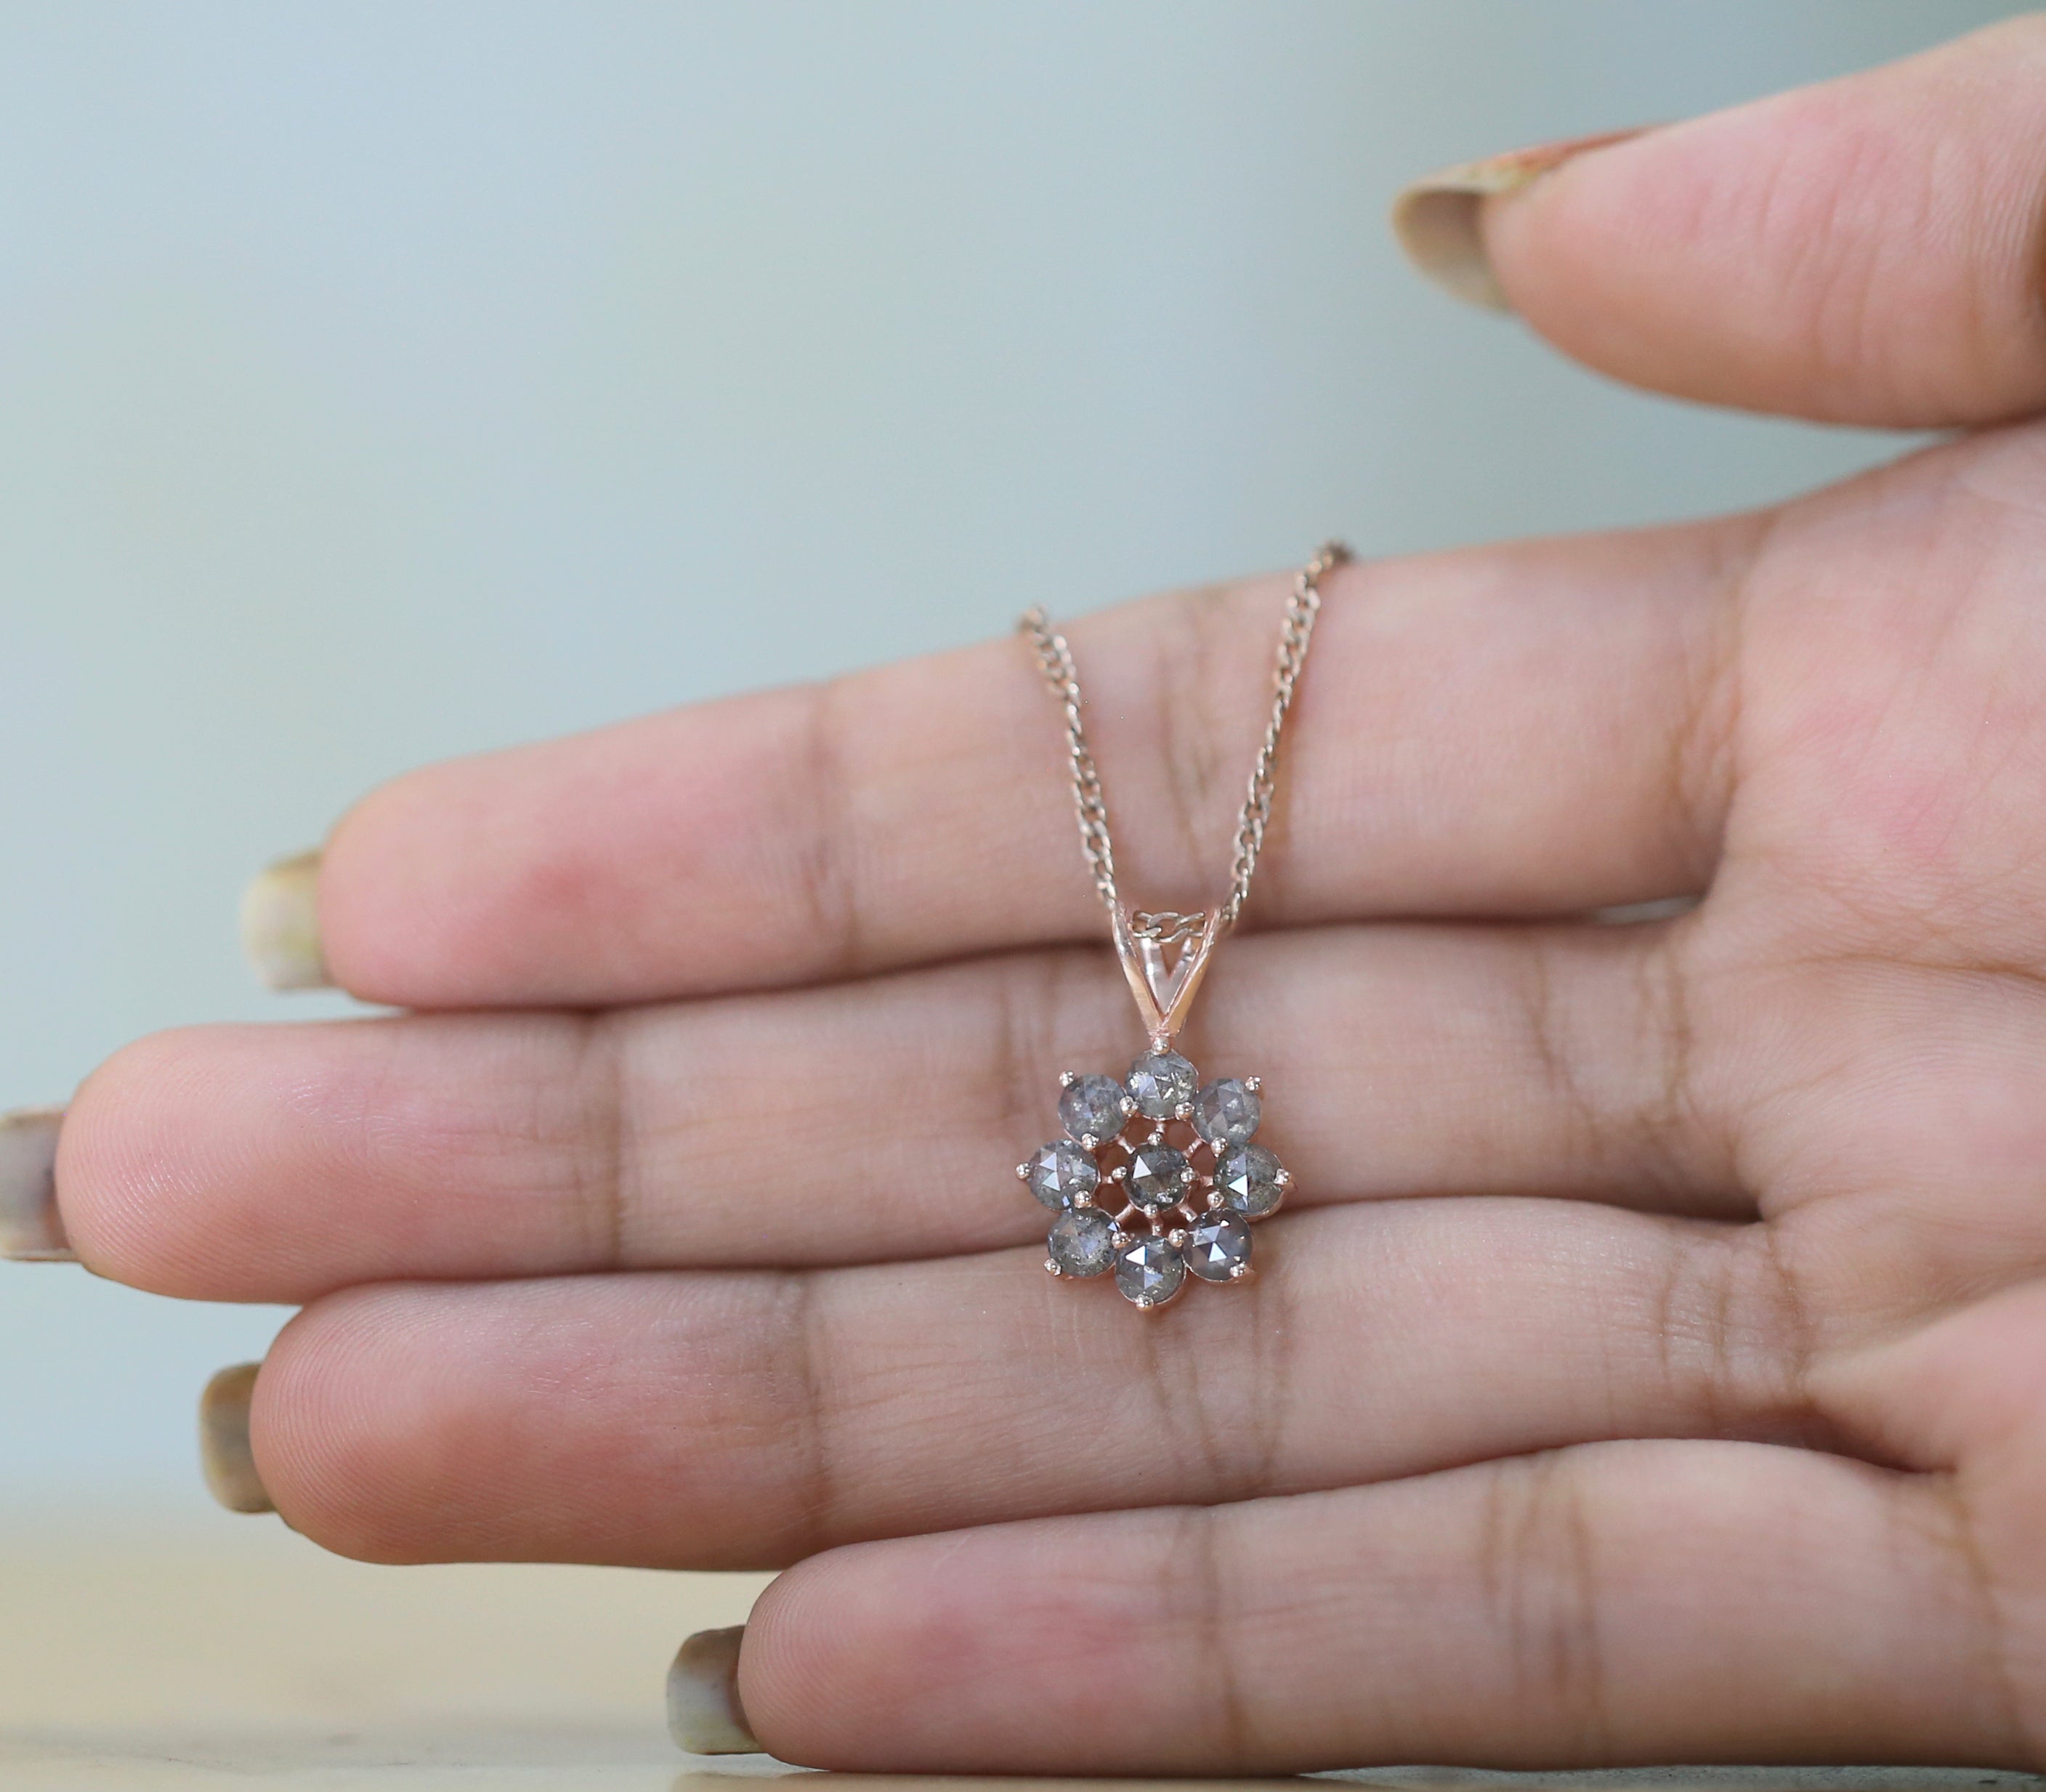 Round Rose Cut Salt And Pepper Diamond Pendant, Unique Diamond Pendant, Dangling Diamond Pendant, No Chain Including Only Pendant KDL8004